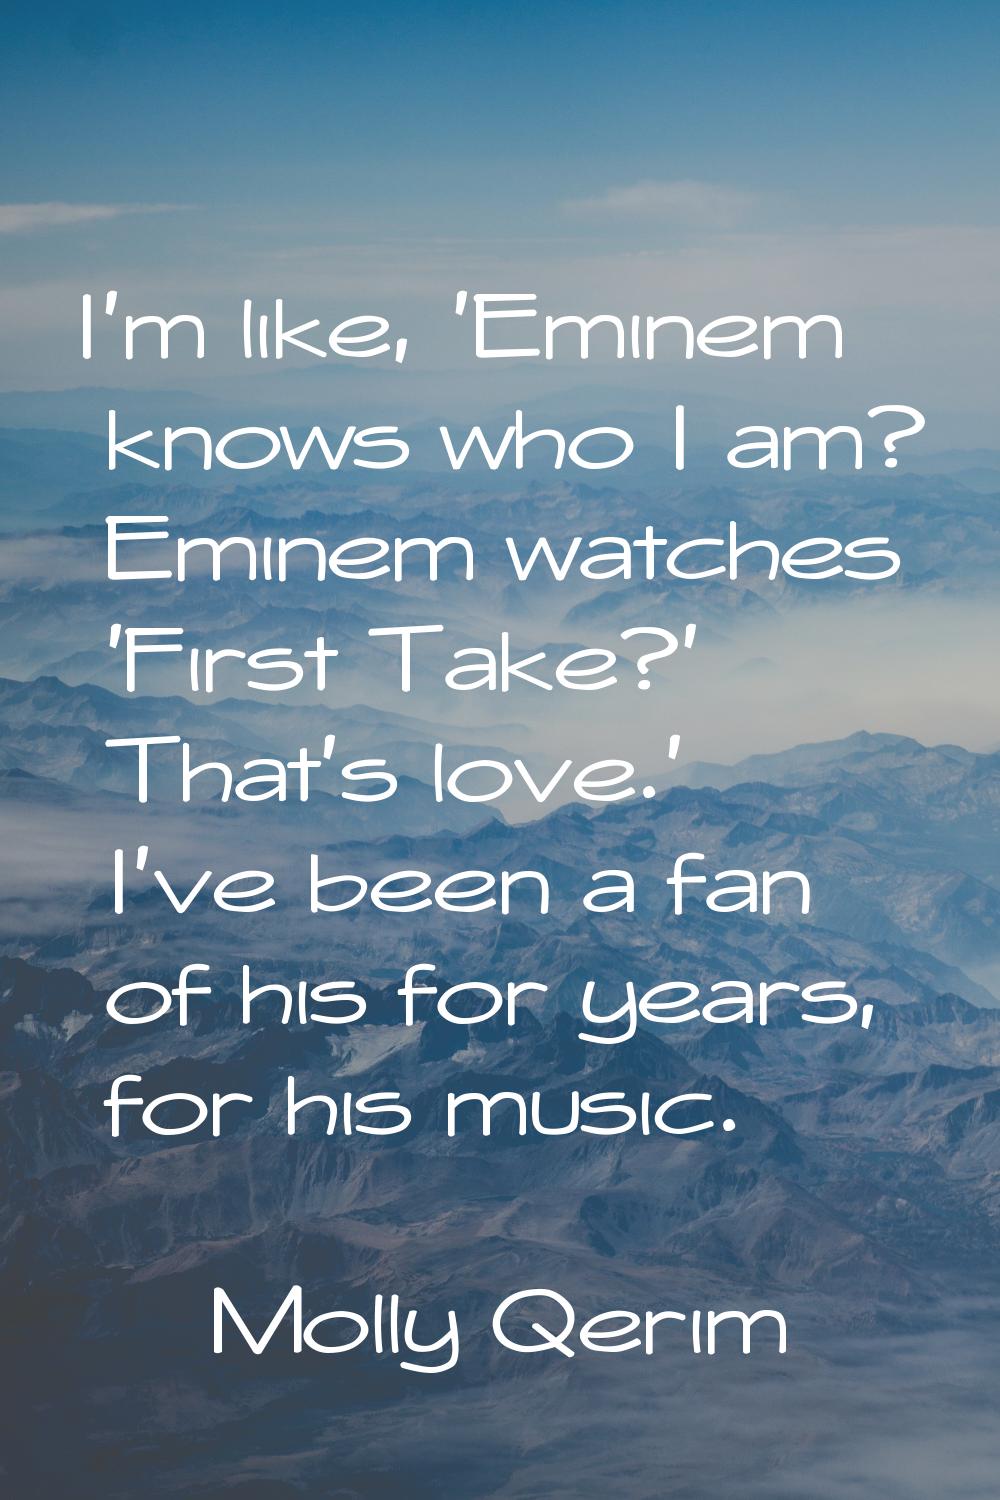 I'm like, 'Eminem knows who I am? Eminem watches 'First Take?' That's love.' I've been a fan of his